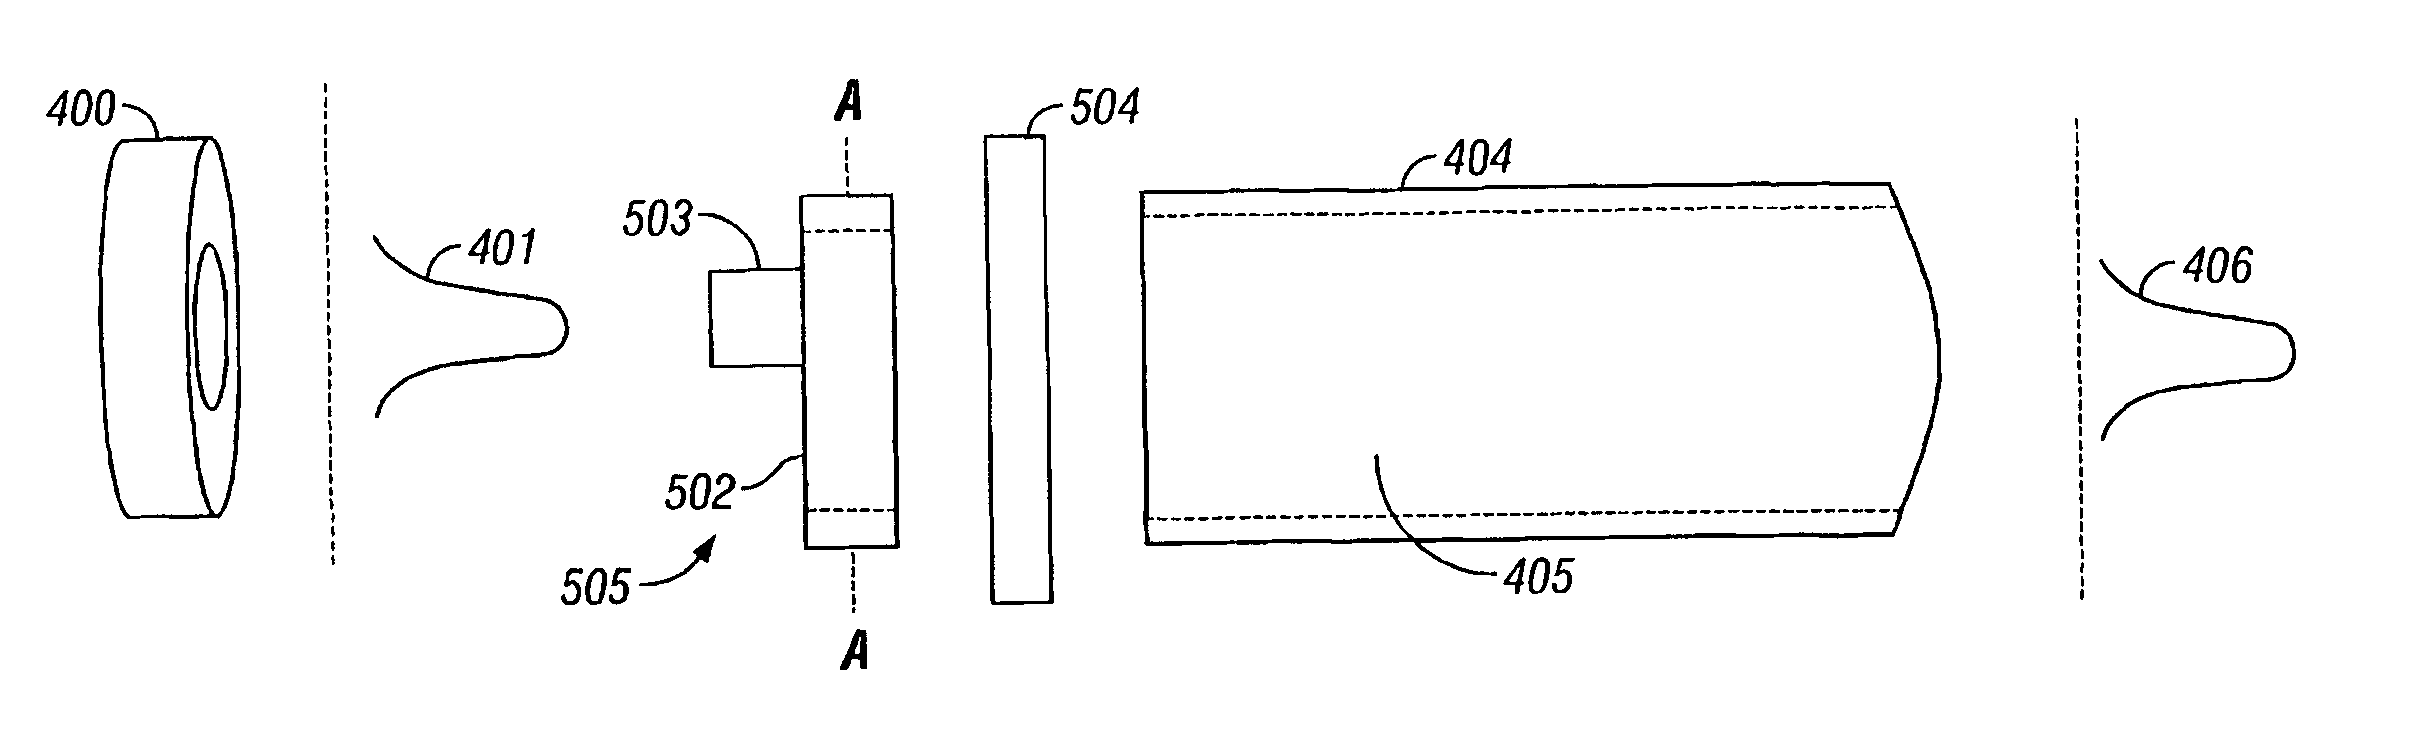 Communications system employing single-mode lasers and multimode optical fibers